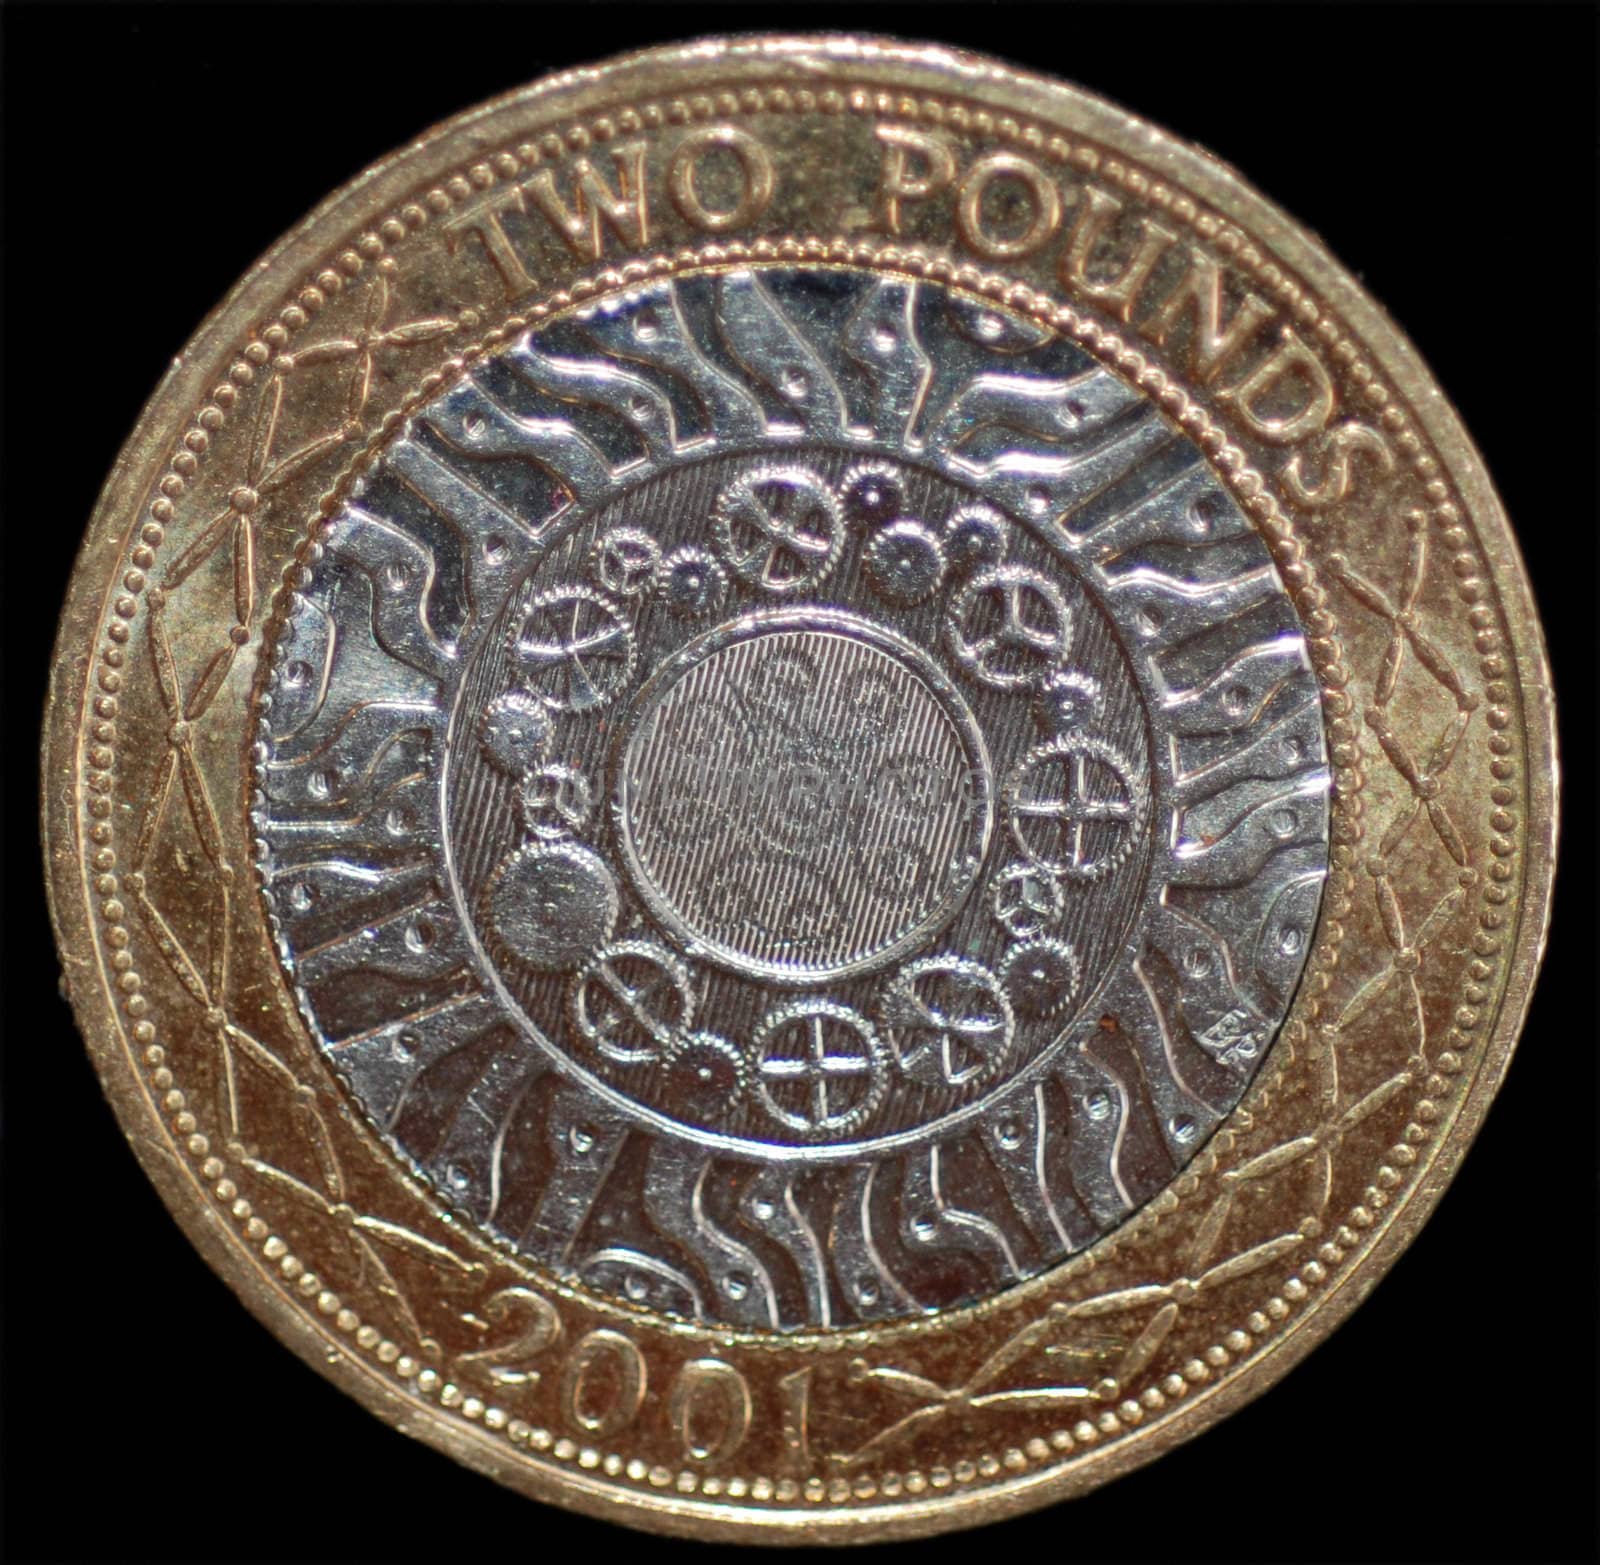 A British 2 Pound Coin by pwillitts